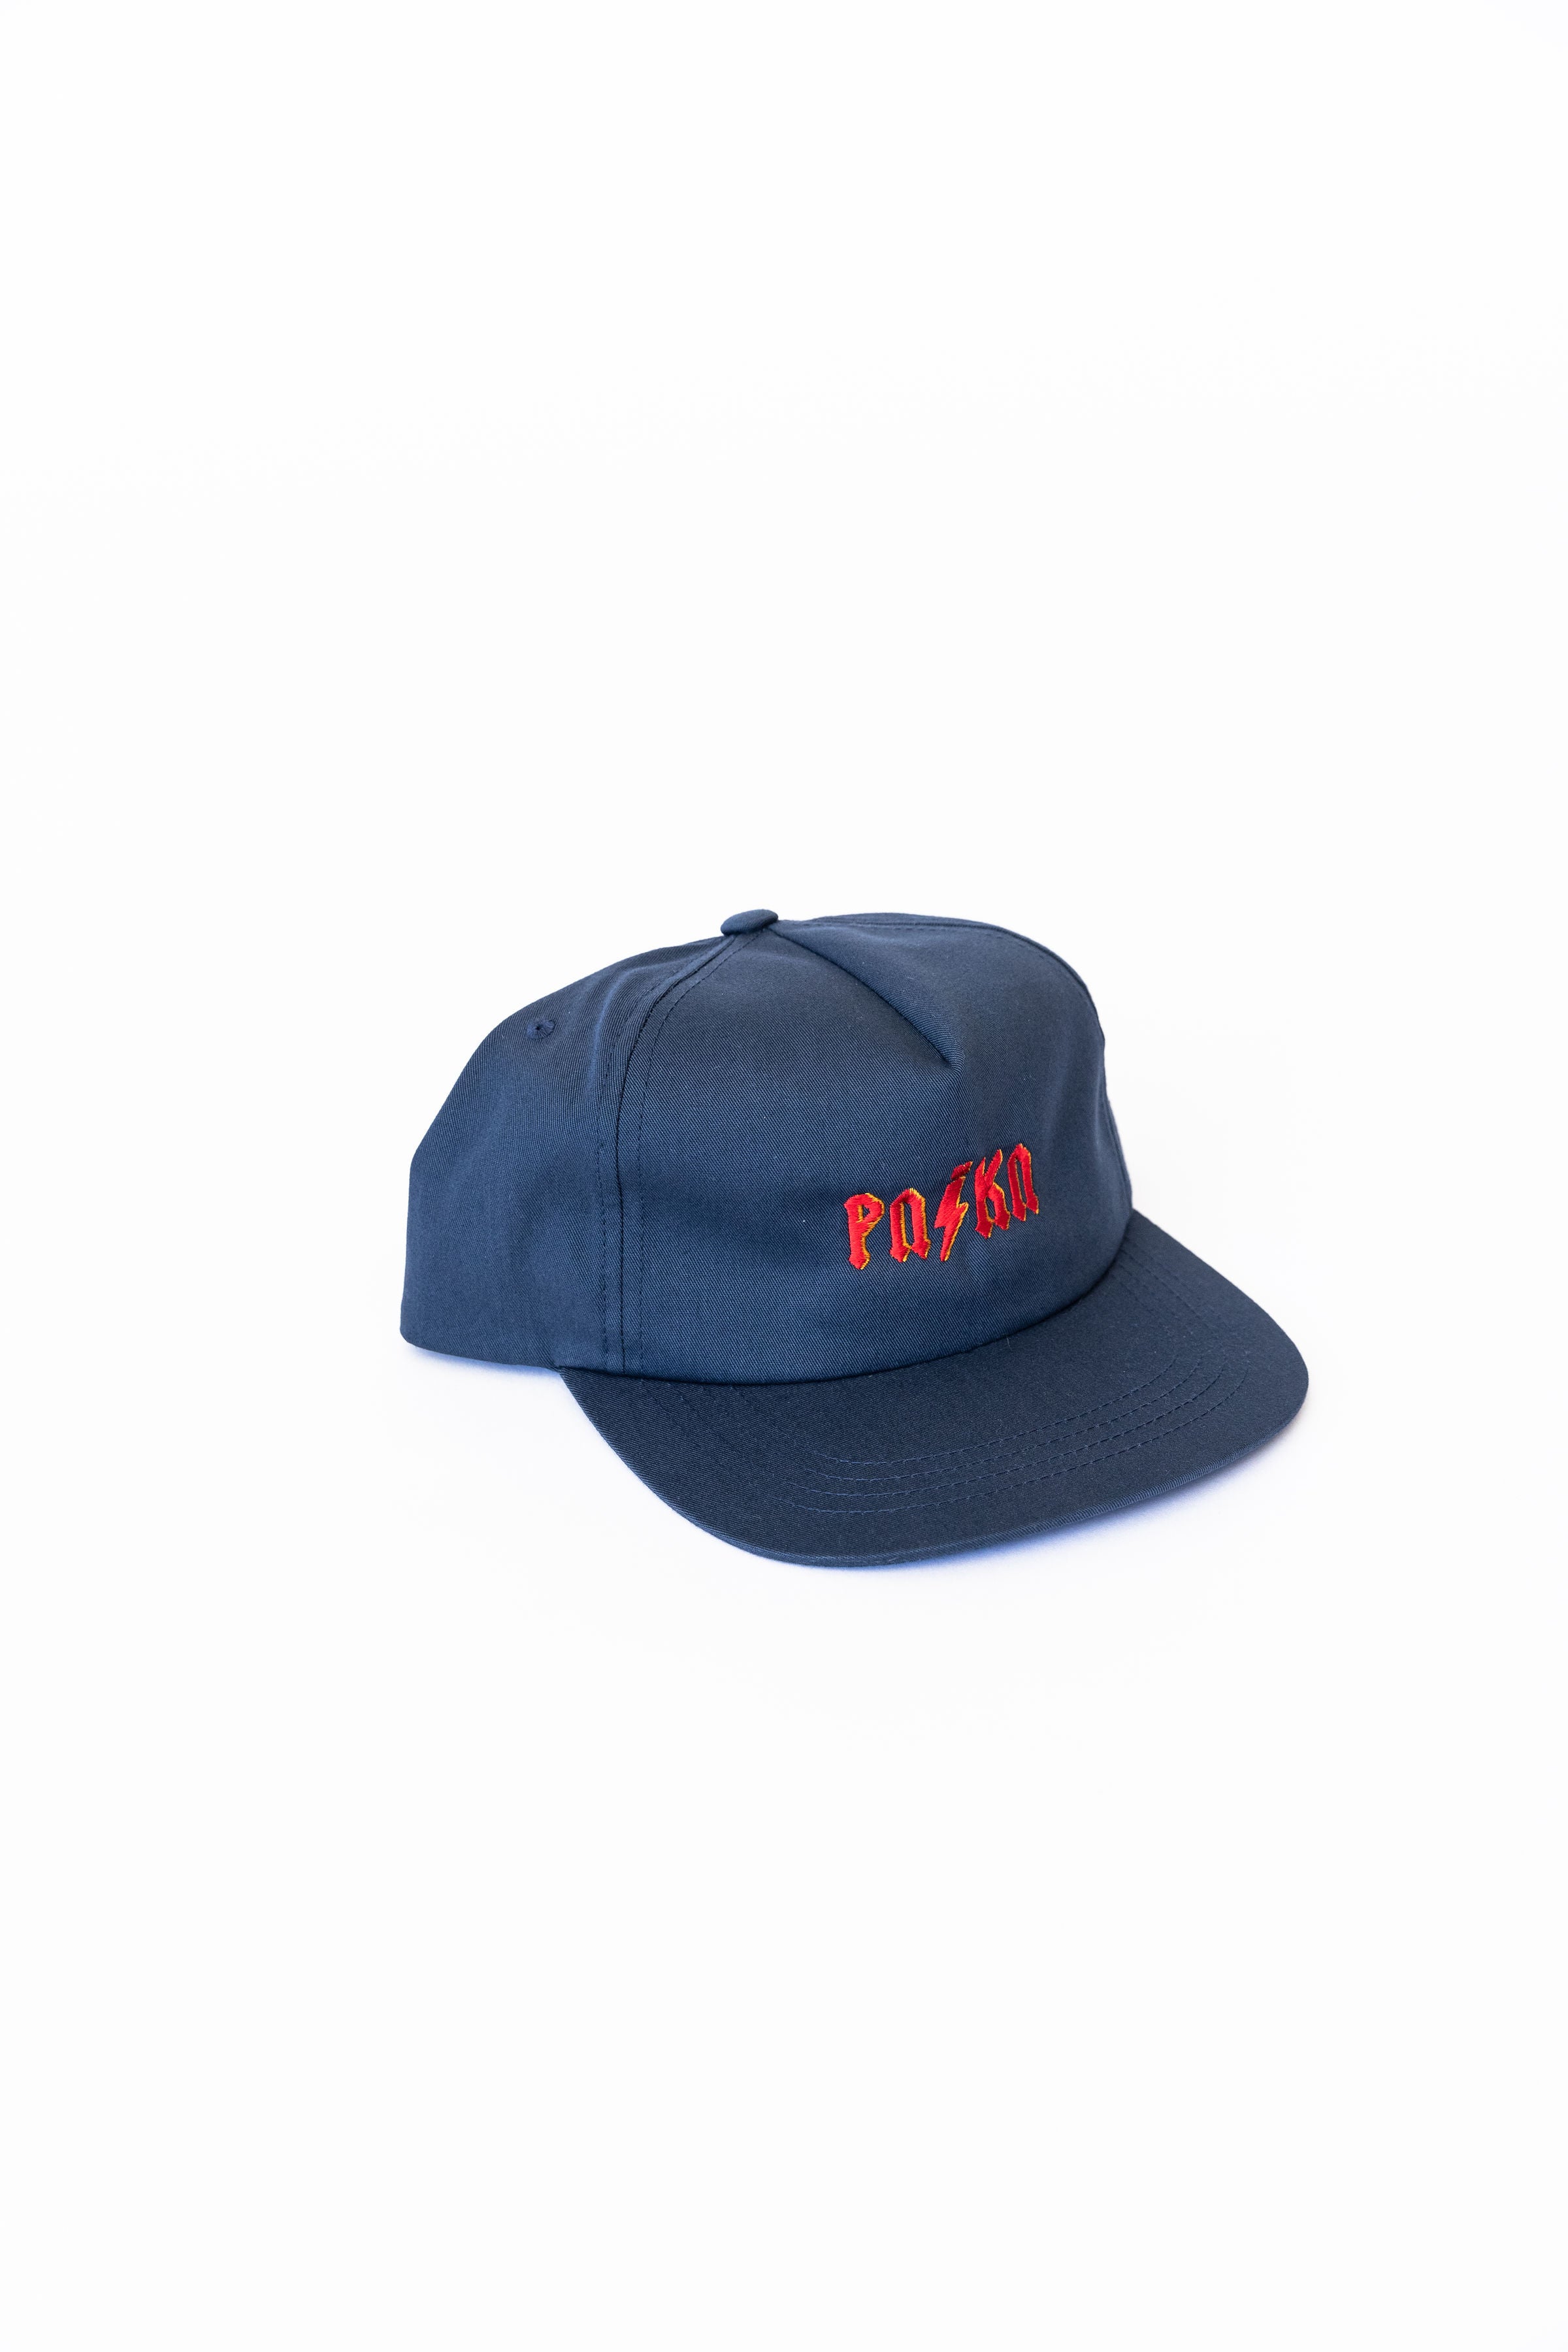 PNiKN Five Panel Unstructured Navy